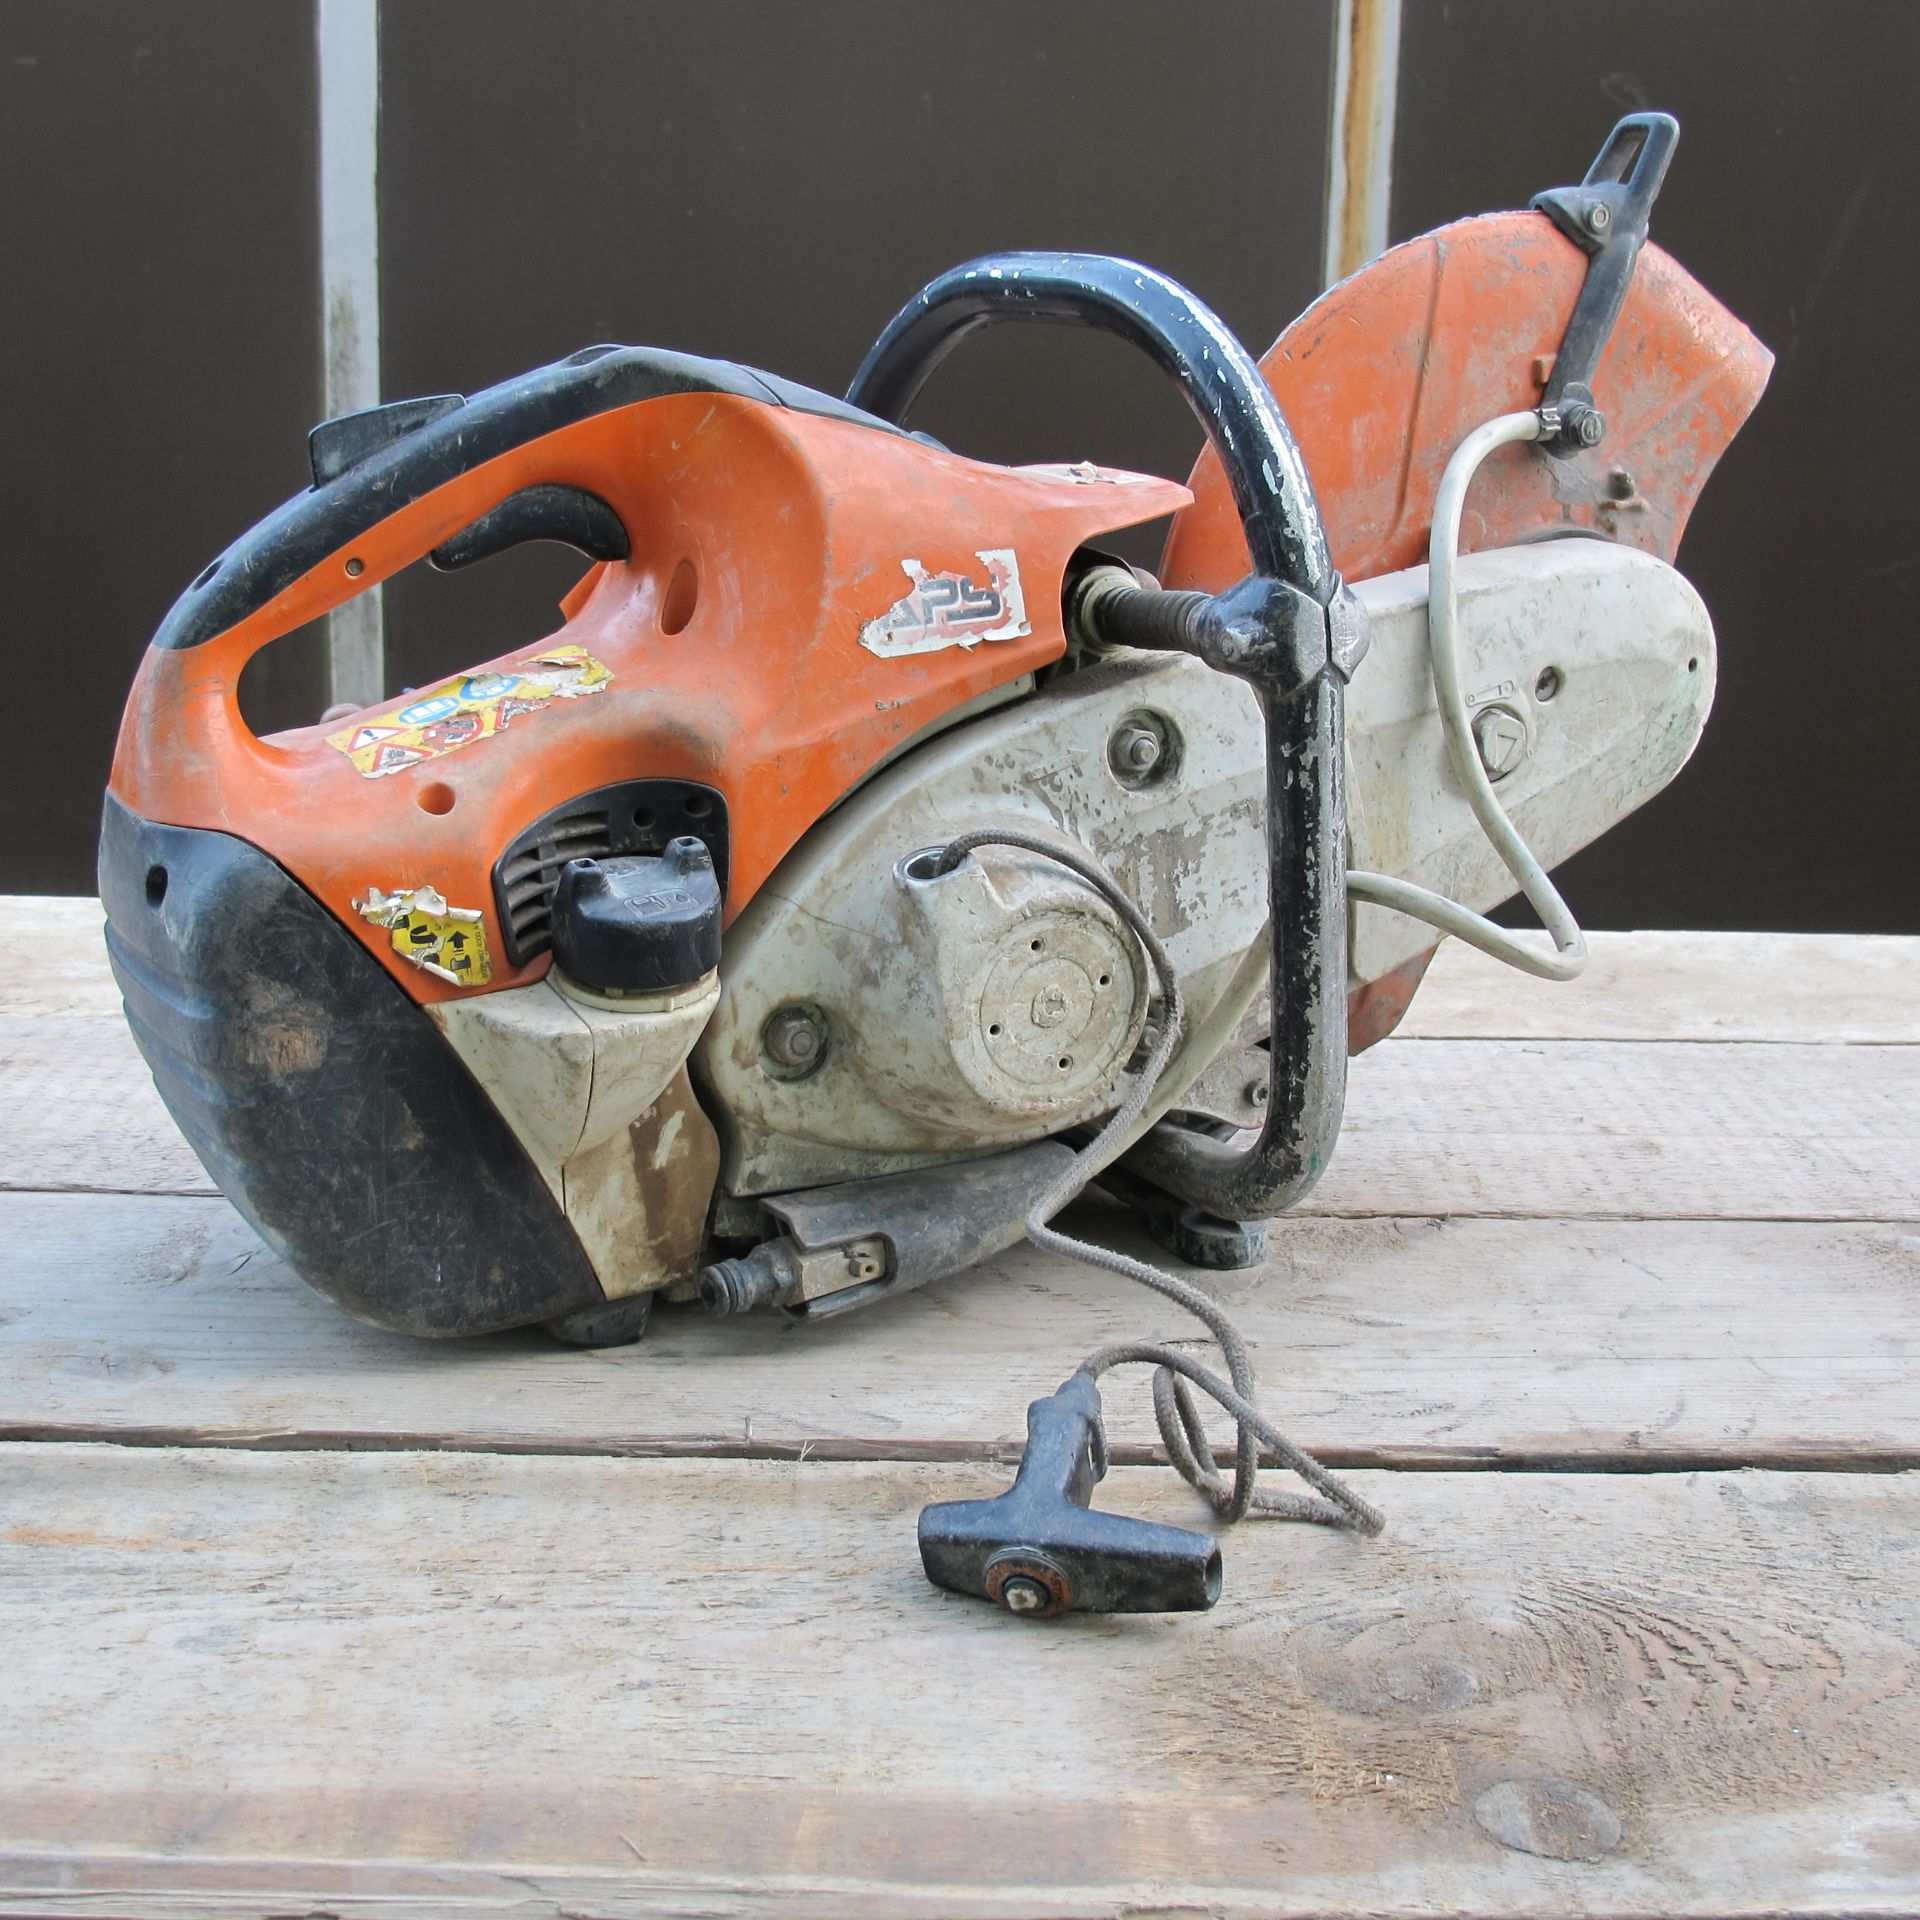 * Stihl TS 410 Petrol Cut Off Saw (Pull Start Recoil Not Working) - Image 2 of 2